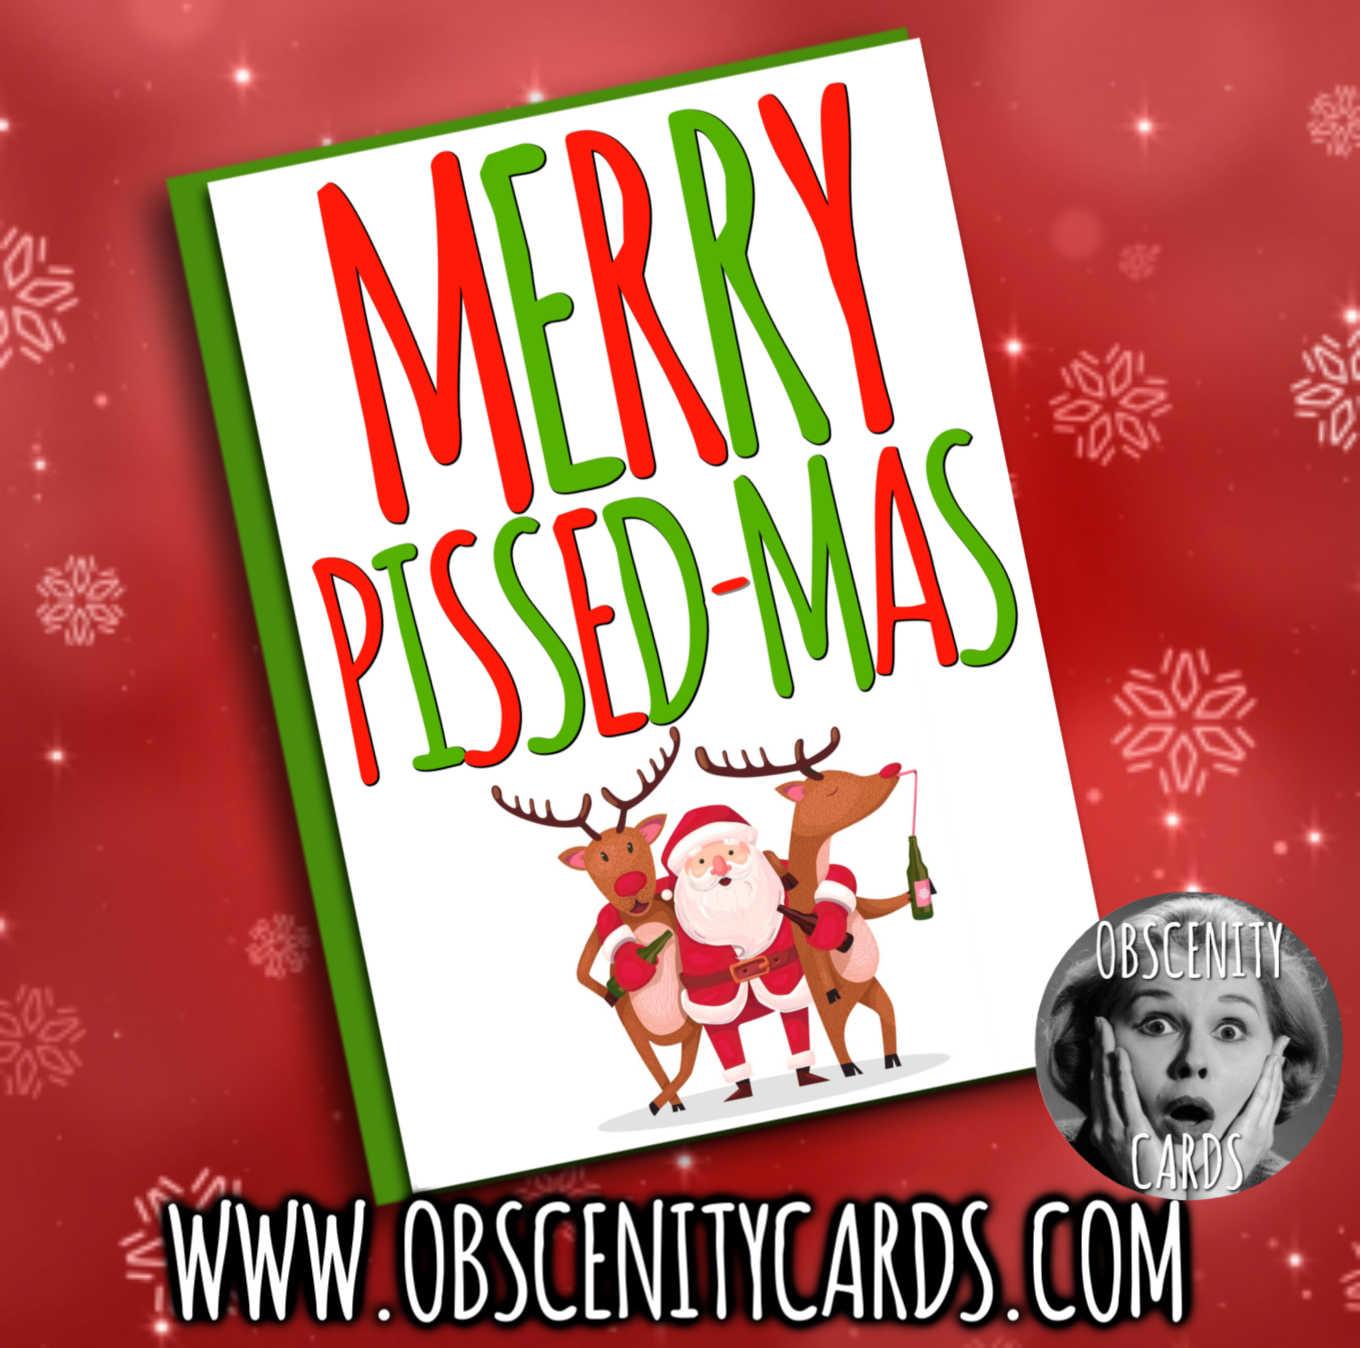 MERRY PISSED-MAS FUNNY CHRISTMAS CARD